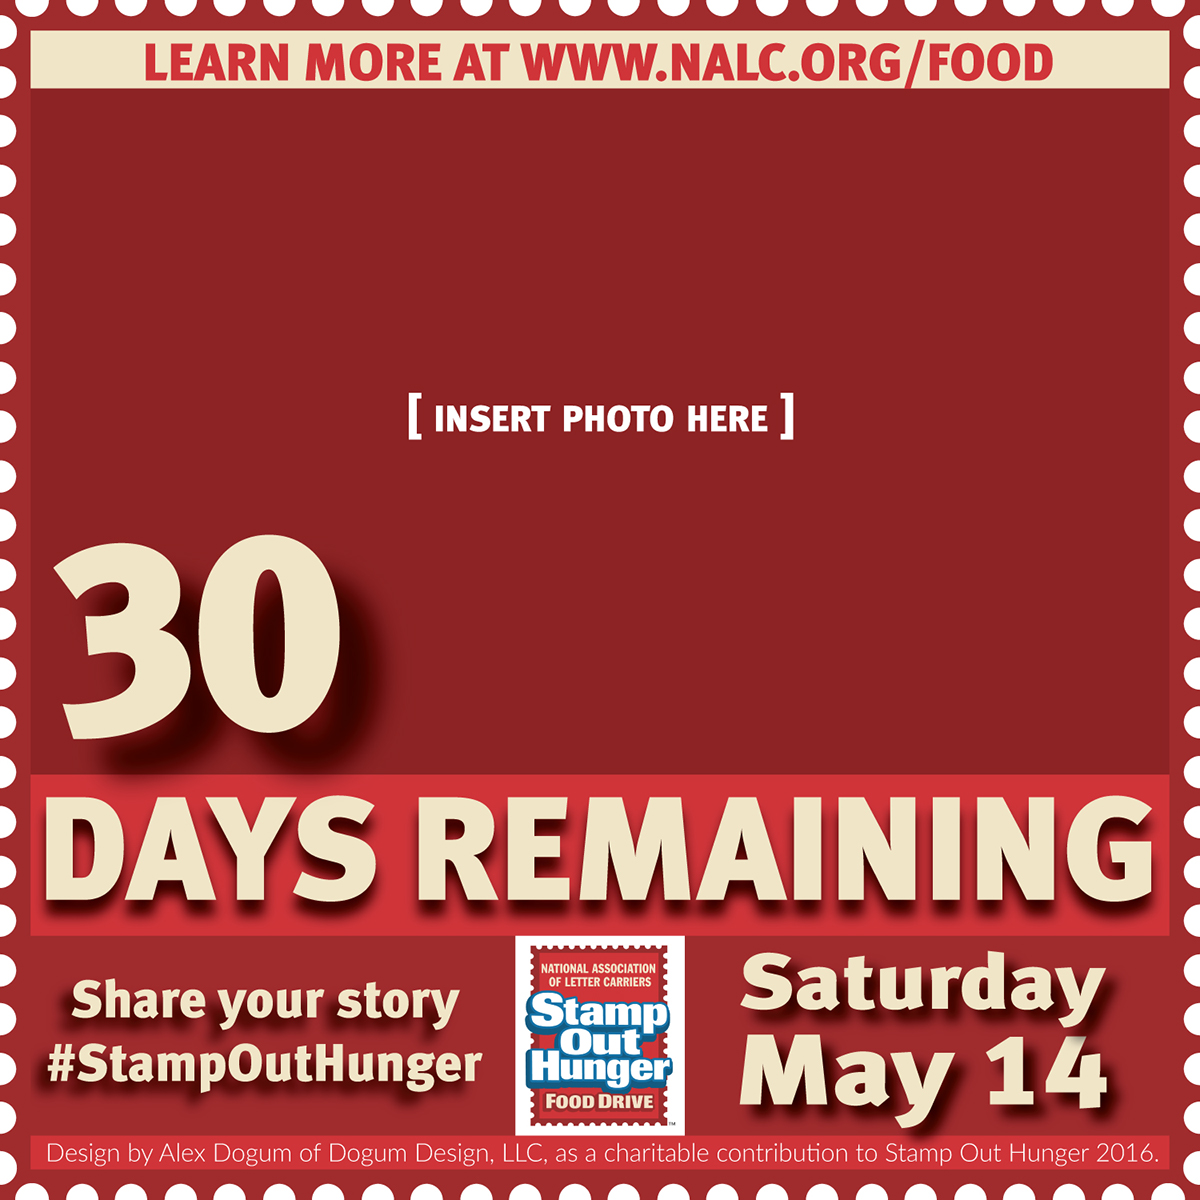 Adobe Portfolio stampouthunger stamp out hunger charity design custom template social media template corporate Corporate Template design Mainstream design media design style custom media design social media campaign countdown images socialmedia social media layout Layout Design publication design